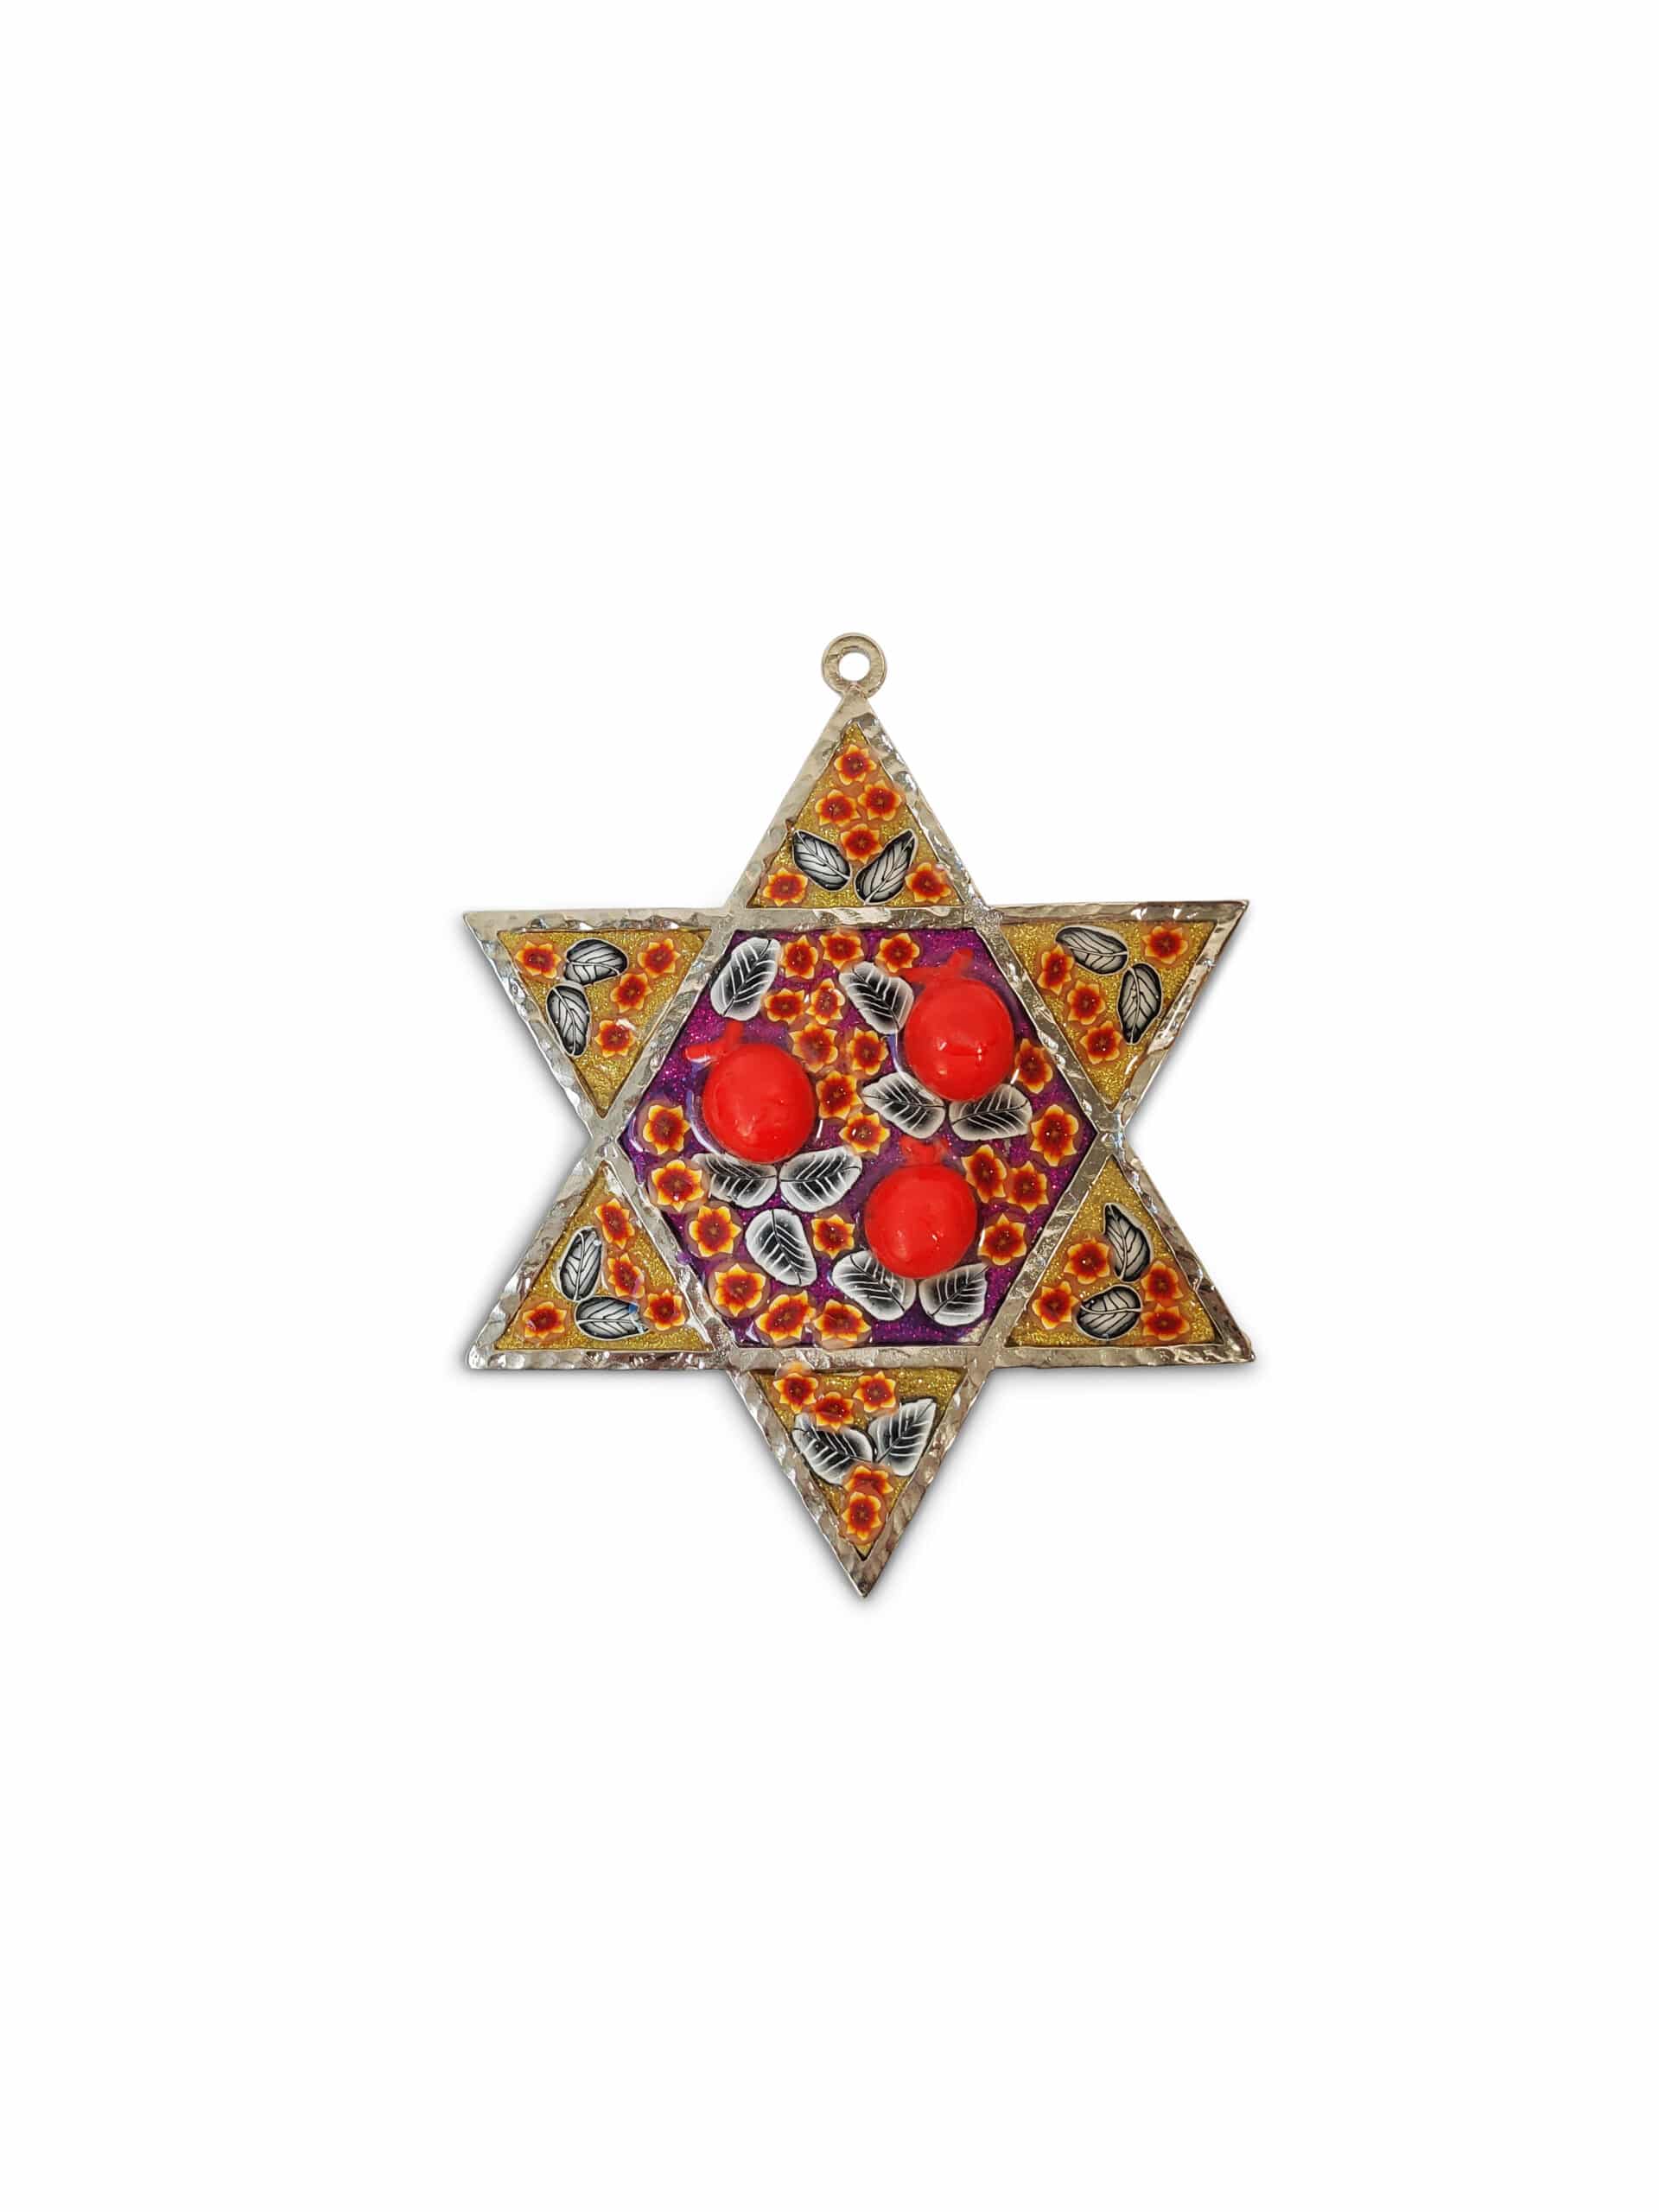 Hebrew Blessing Star of David Wall Hanging